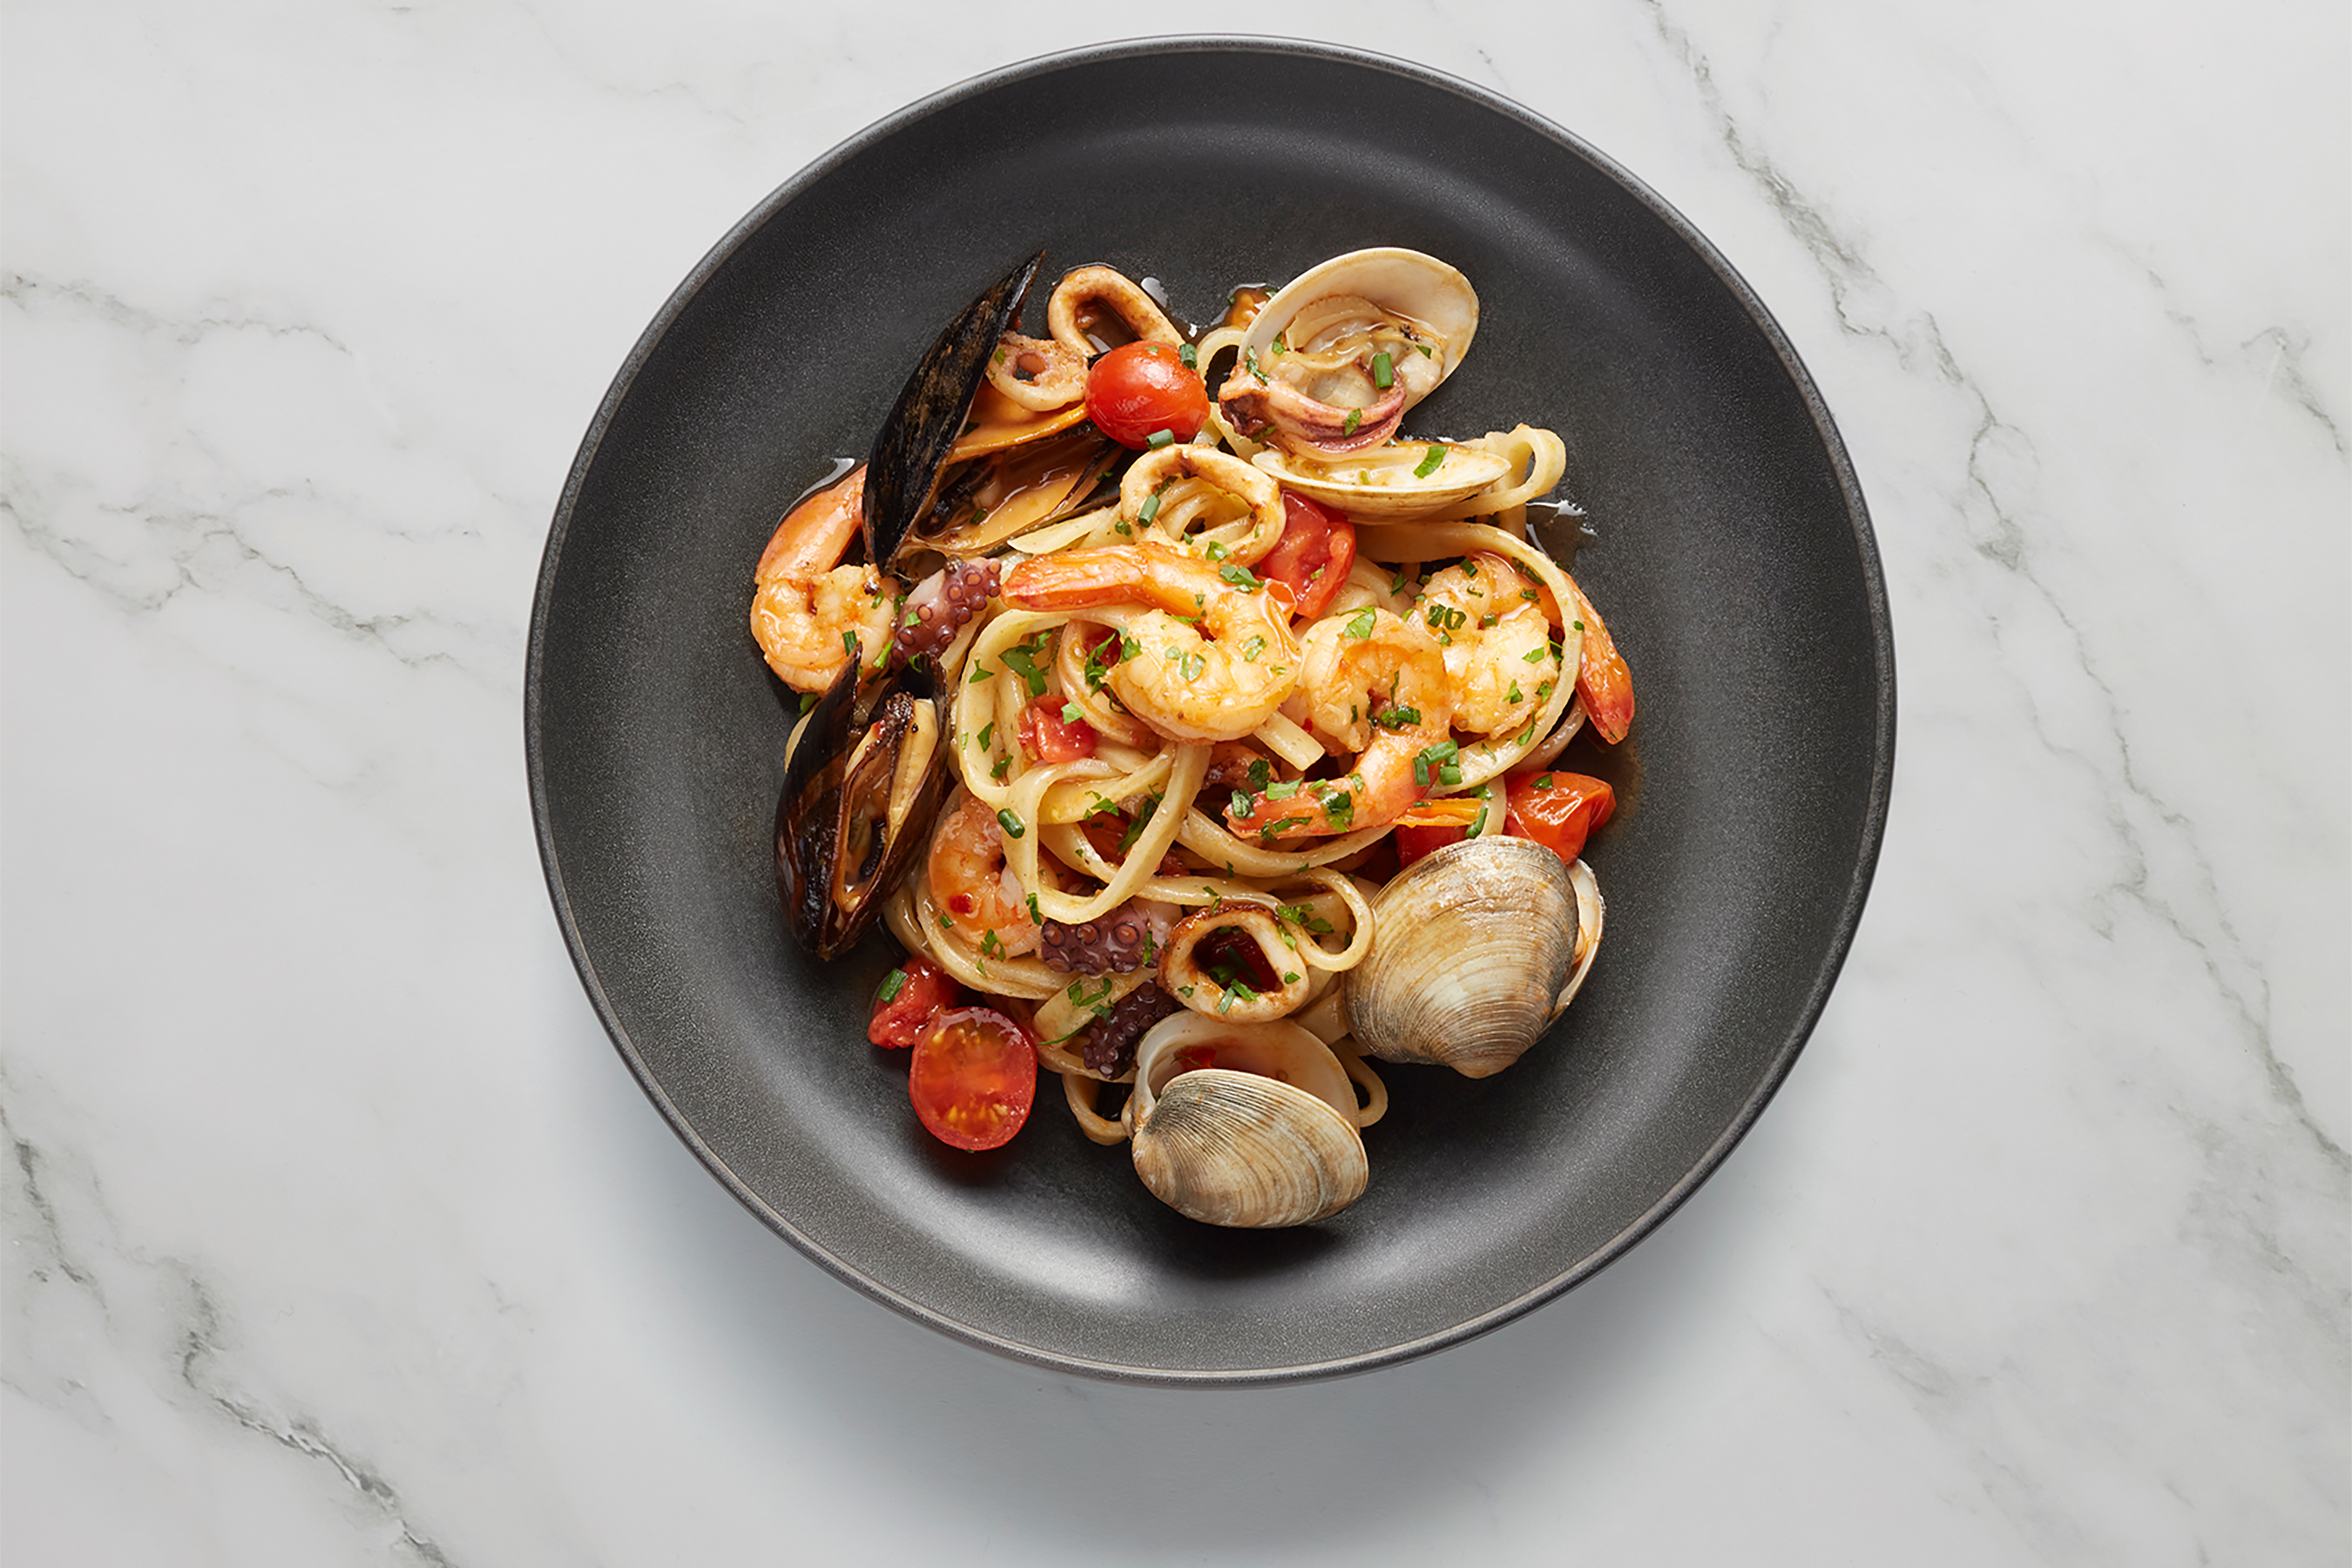 Hudson’s and The Commodore Room, the new main dining rooms for Norwegian Prima and Viva, will boast a revamped extensive fixed menu with global dishes including Italian mussels prepared in a white wine sauce to fully vegetarian options such as mushroom risotto and cauliflower piccata.